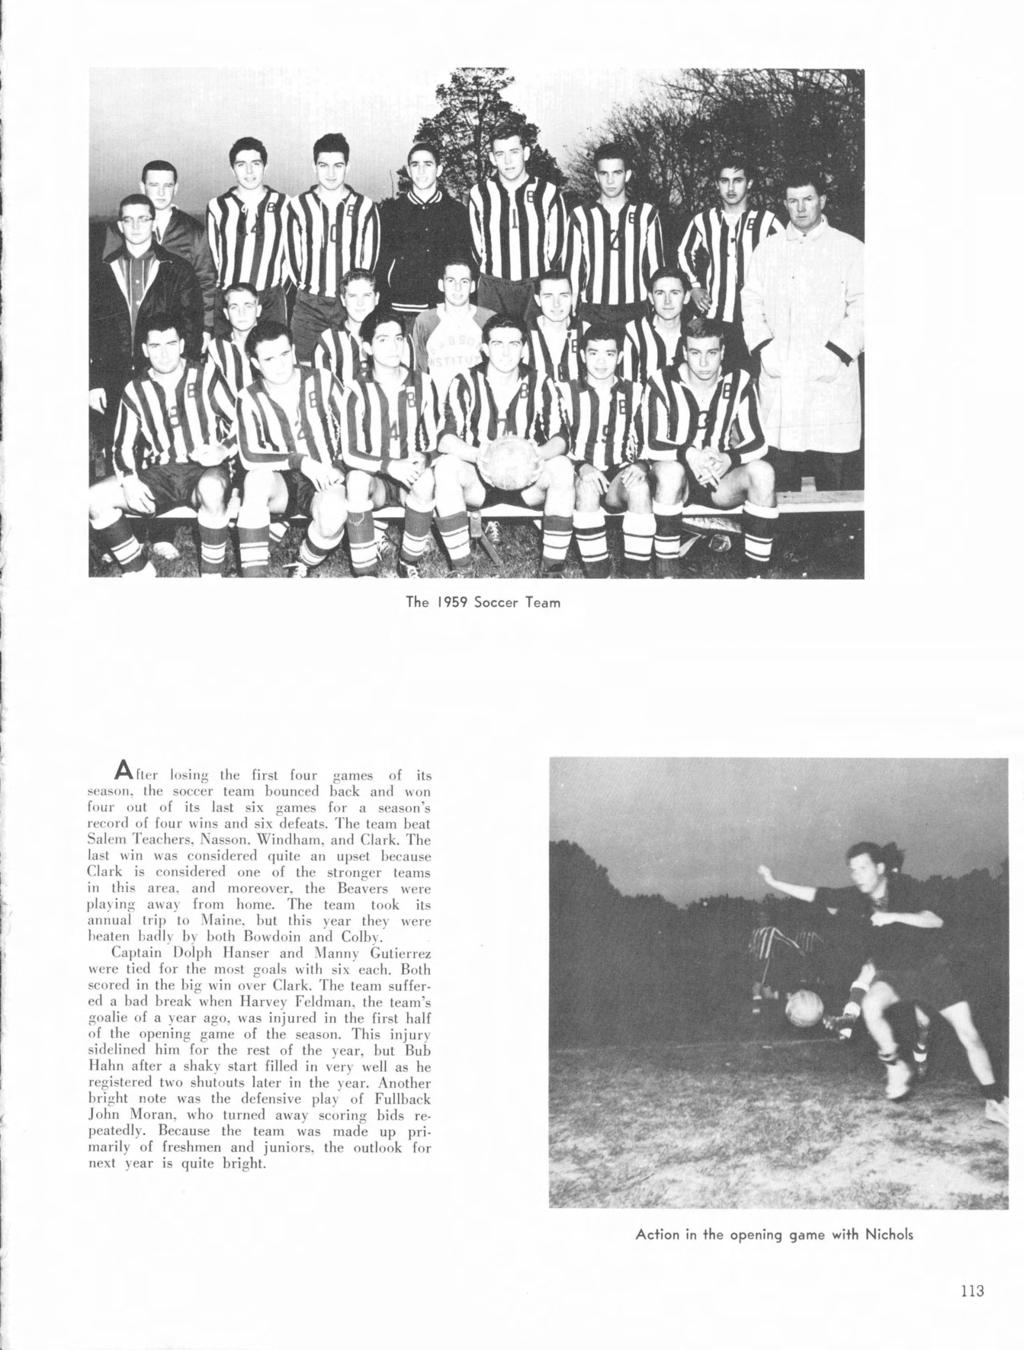 The 1959 Soccer Team A [tel' losi ng the first four games of its season, the soccer team bounced back and won four out of its last six games for a season's record of four wins and six defeats.